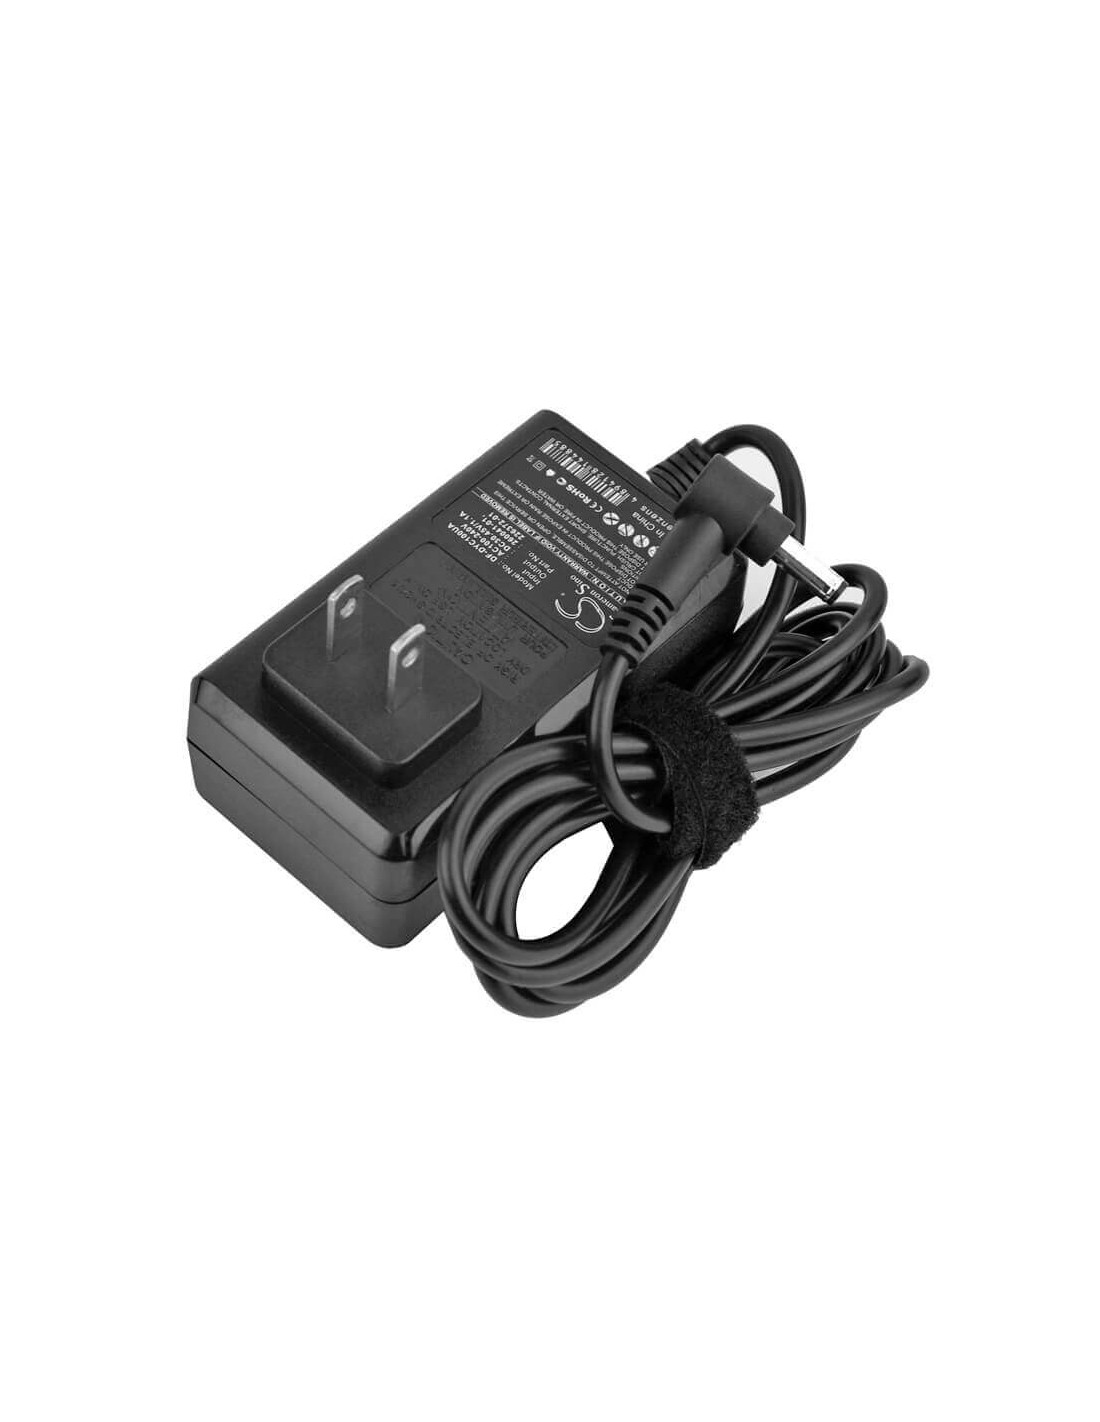 Battery charger for Dyson, Cyclone V10, V10, V10 Absolute